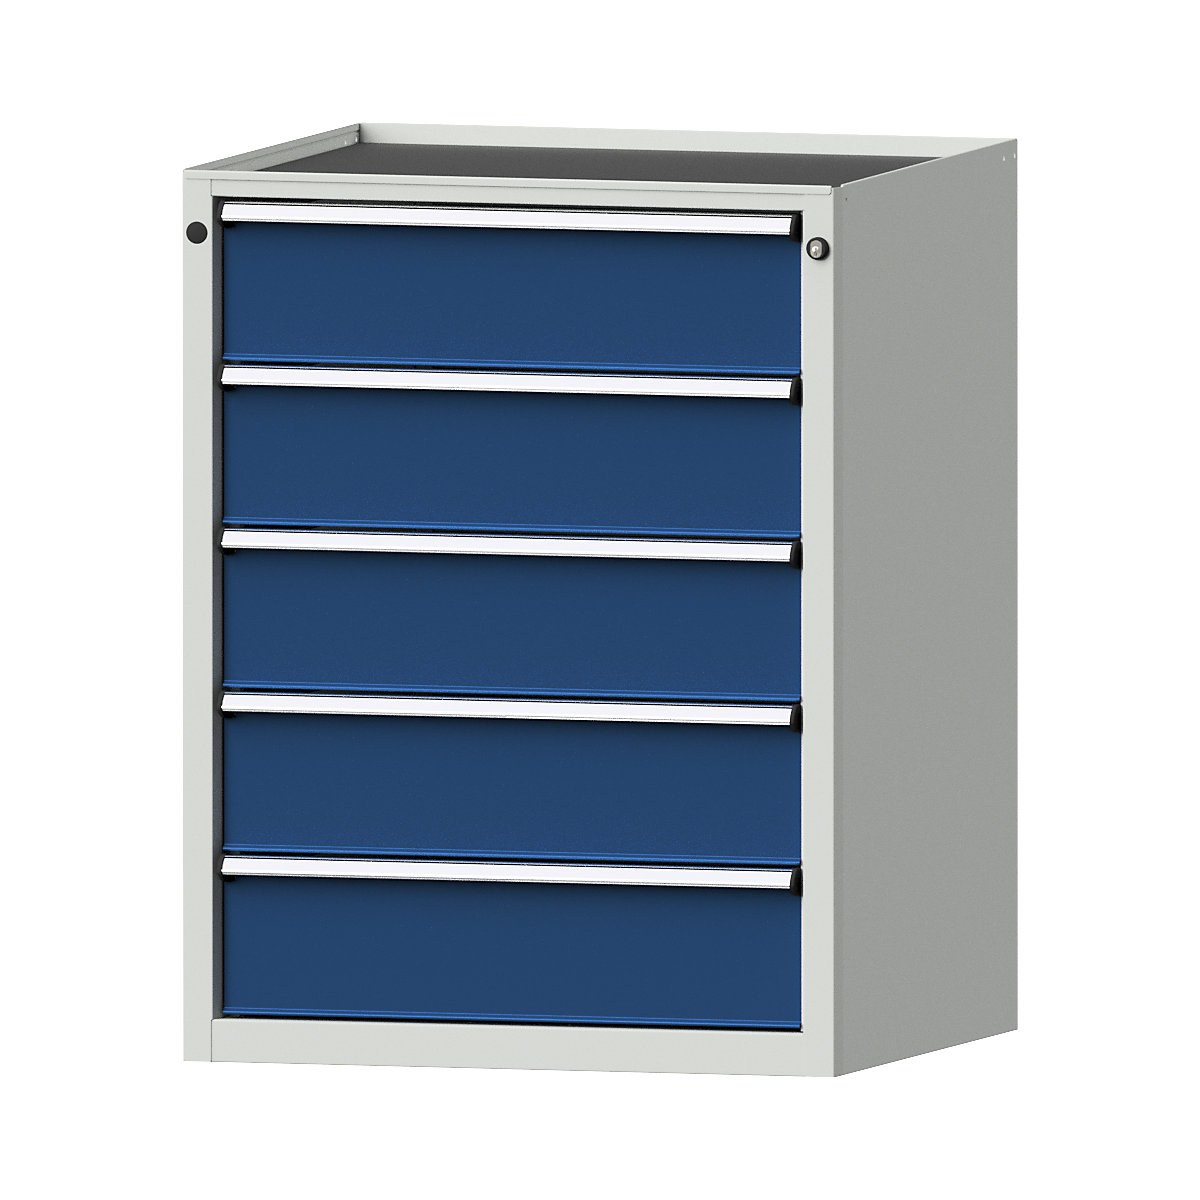 Drawer cupboard – ANKE, WxD 760 x 675 mm, 5 drawers, height 980 mm, front in gentian blue-11